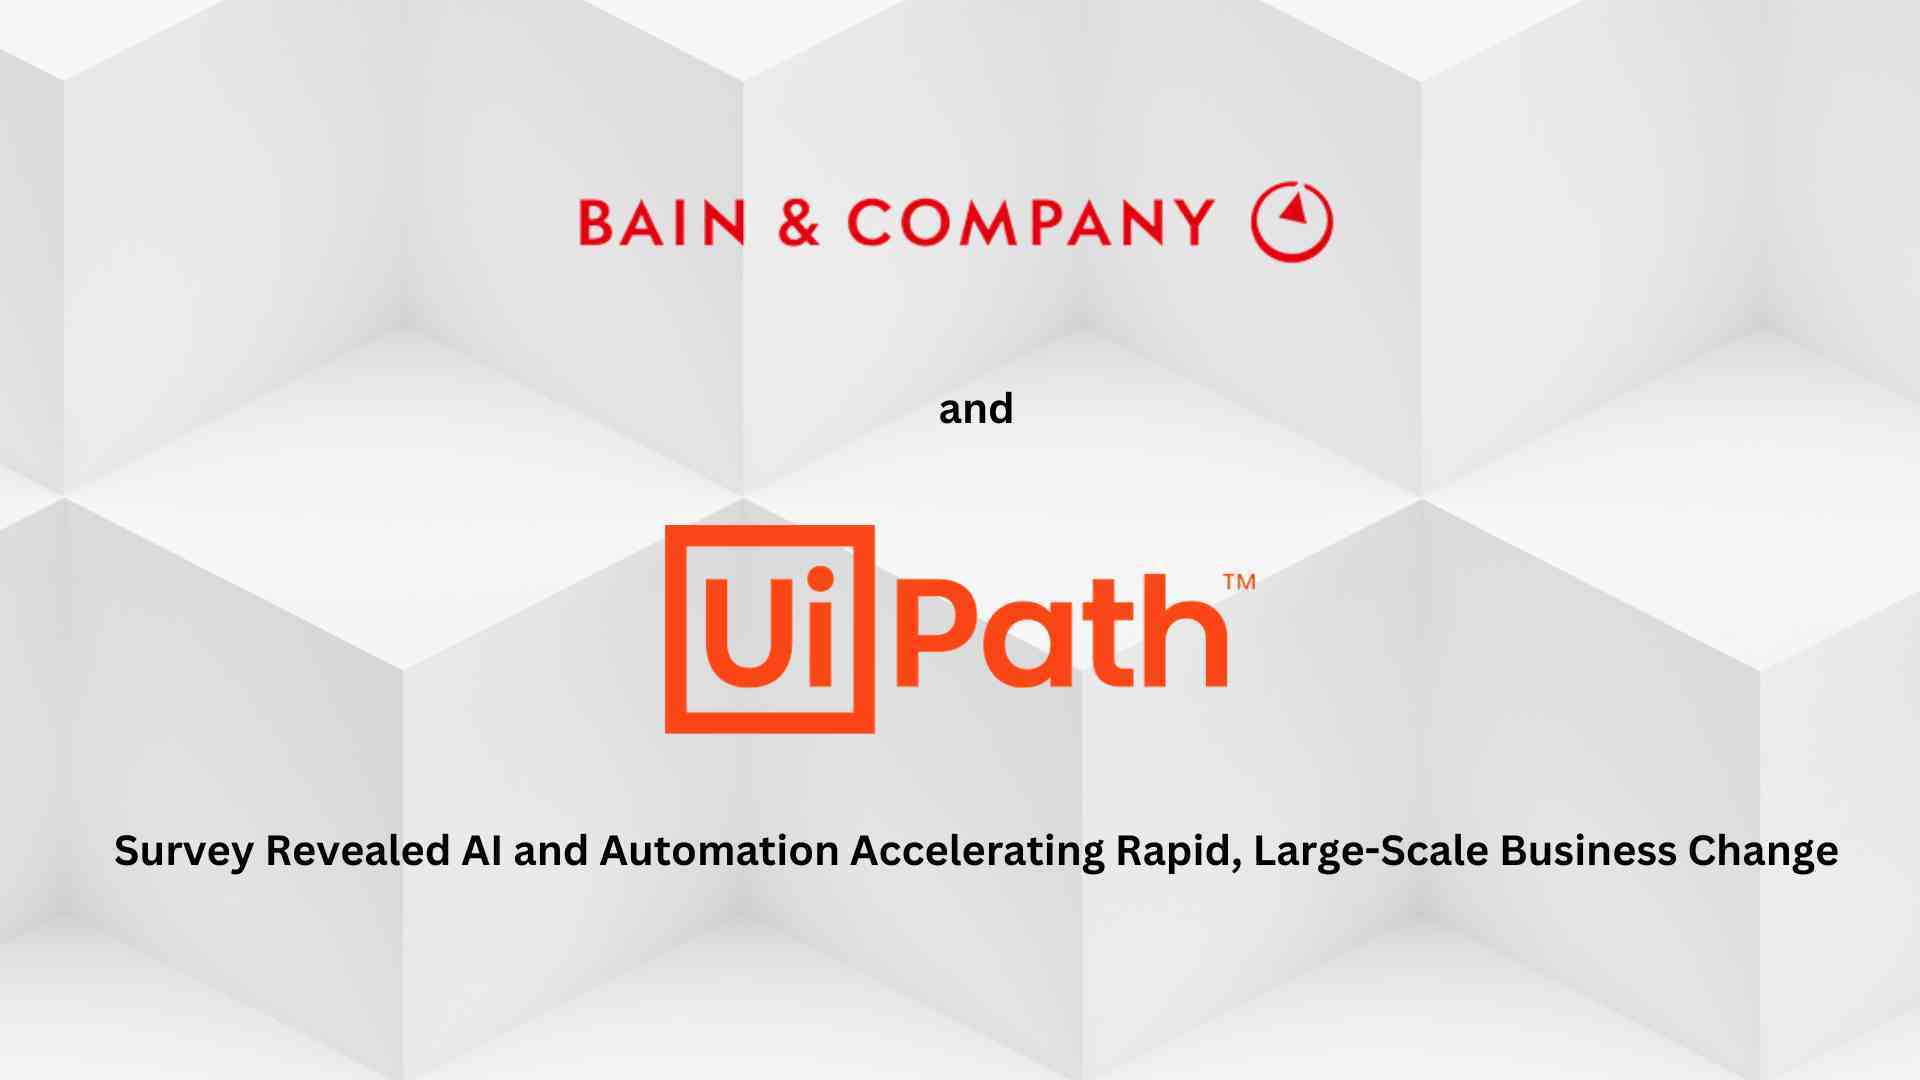 AI and automation accelerating rapid, large-scale business change across multiple sectors—Bain & Company and UiPath survey